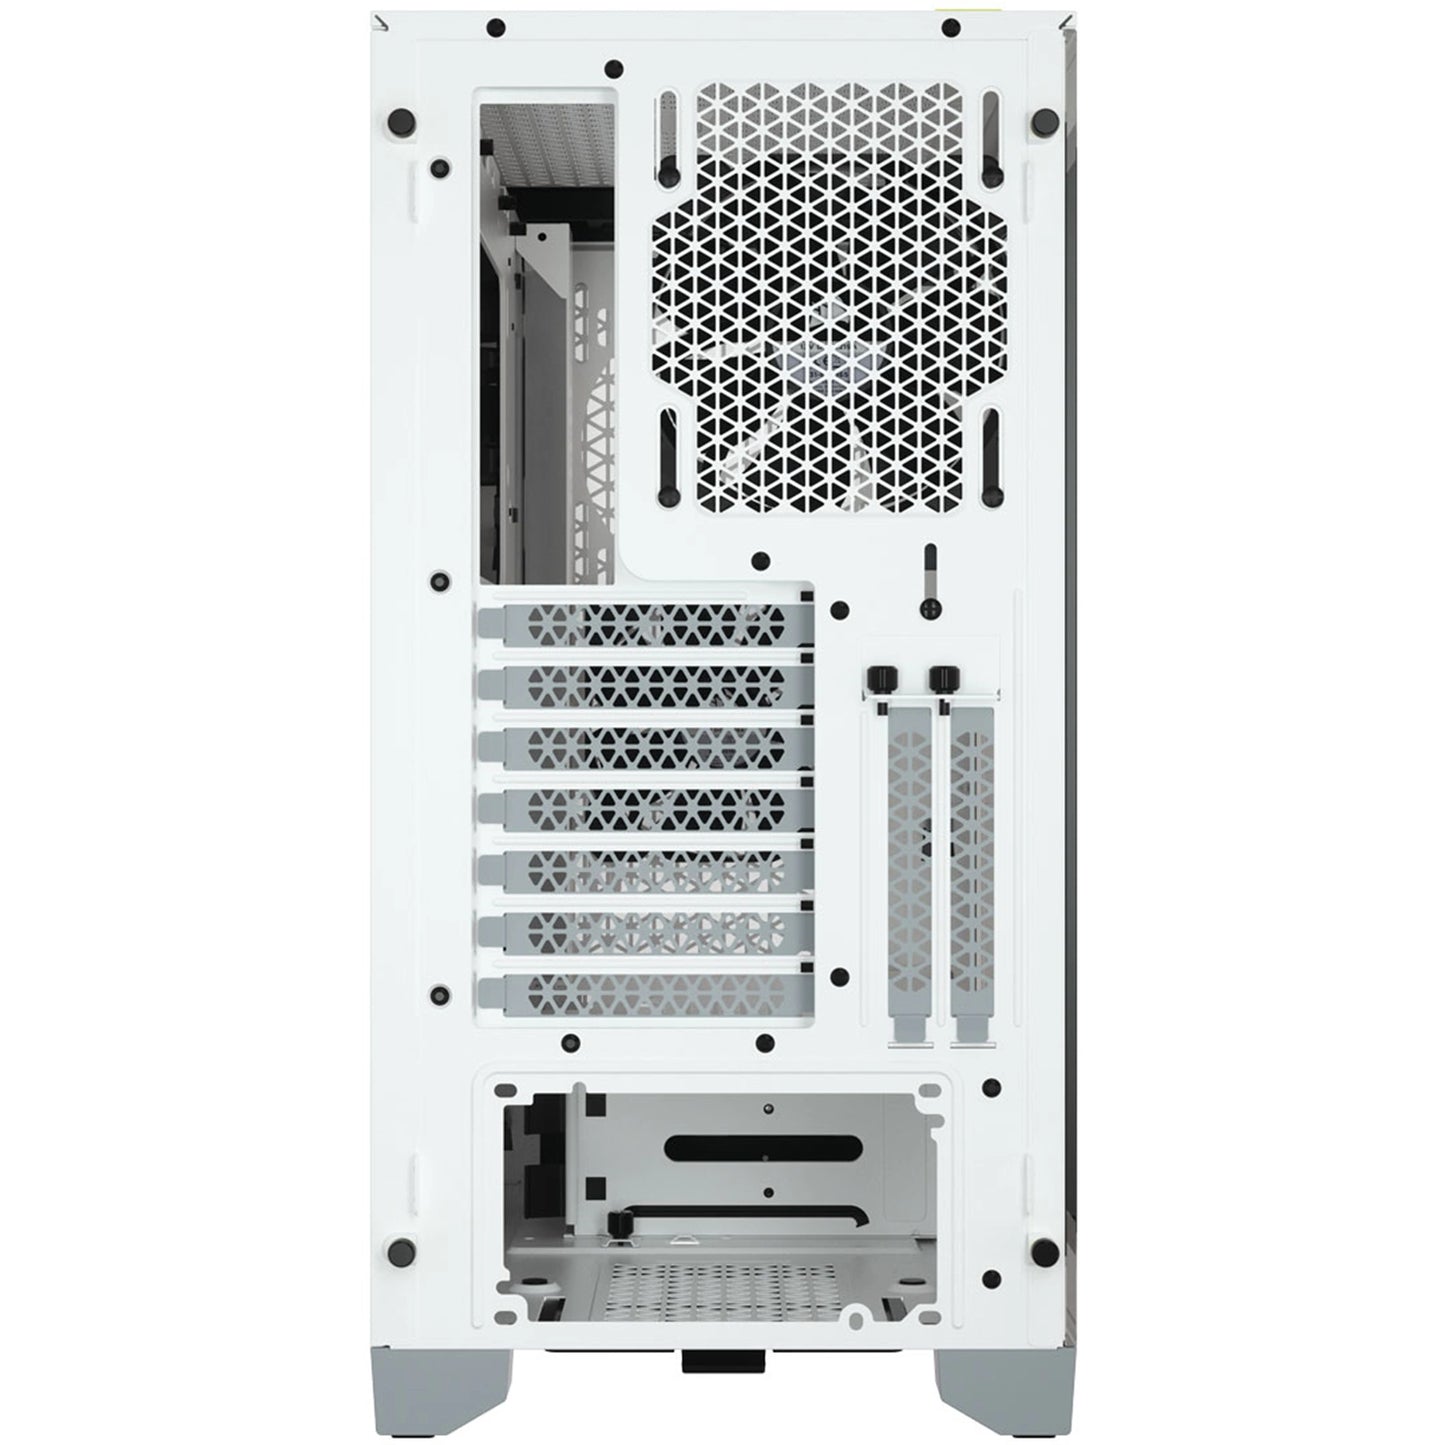 Corsair 4000D Airflow White ATX MidTower Tempered Glass Gaming Case